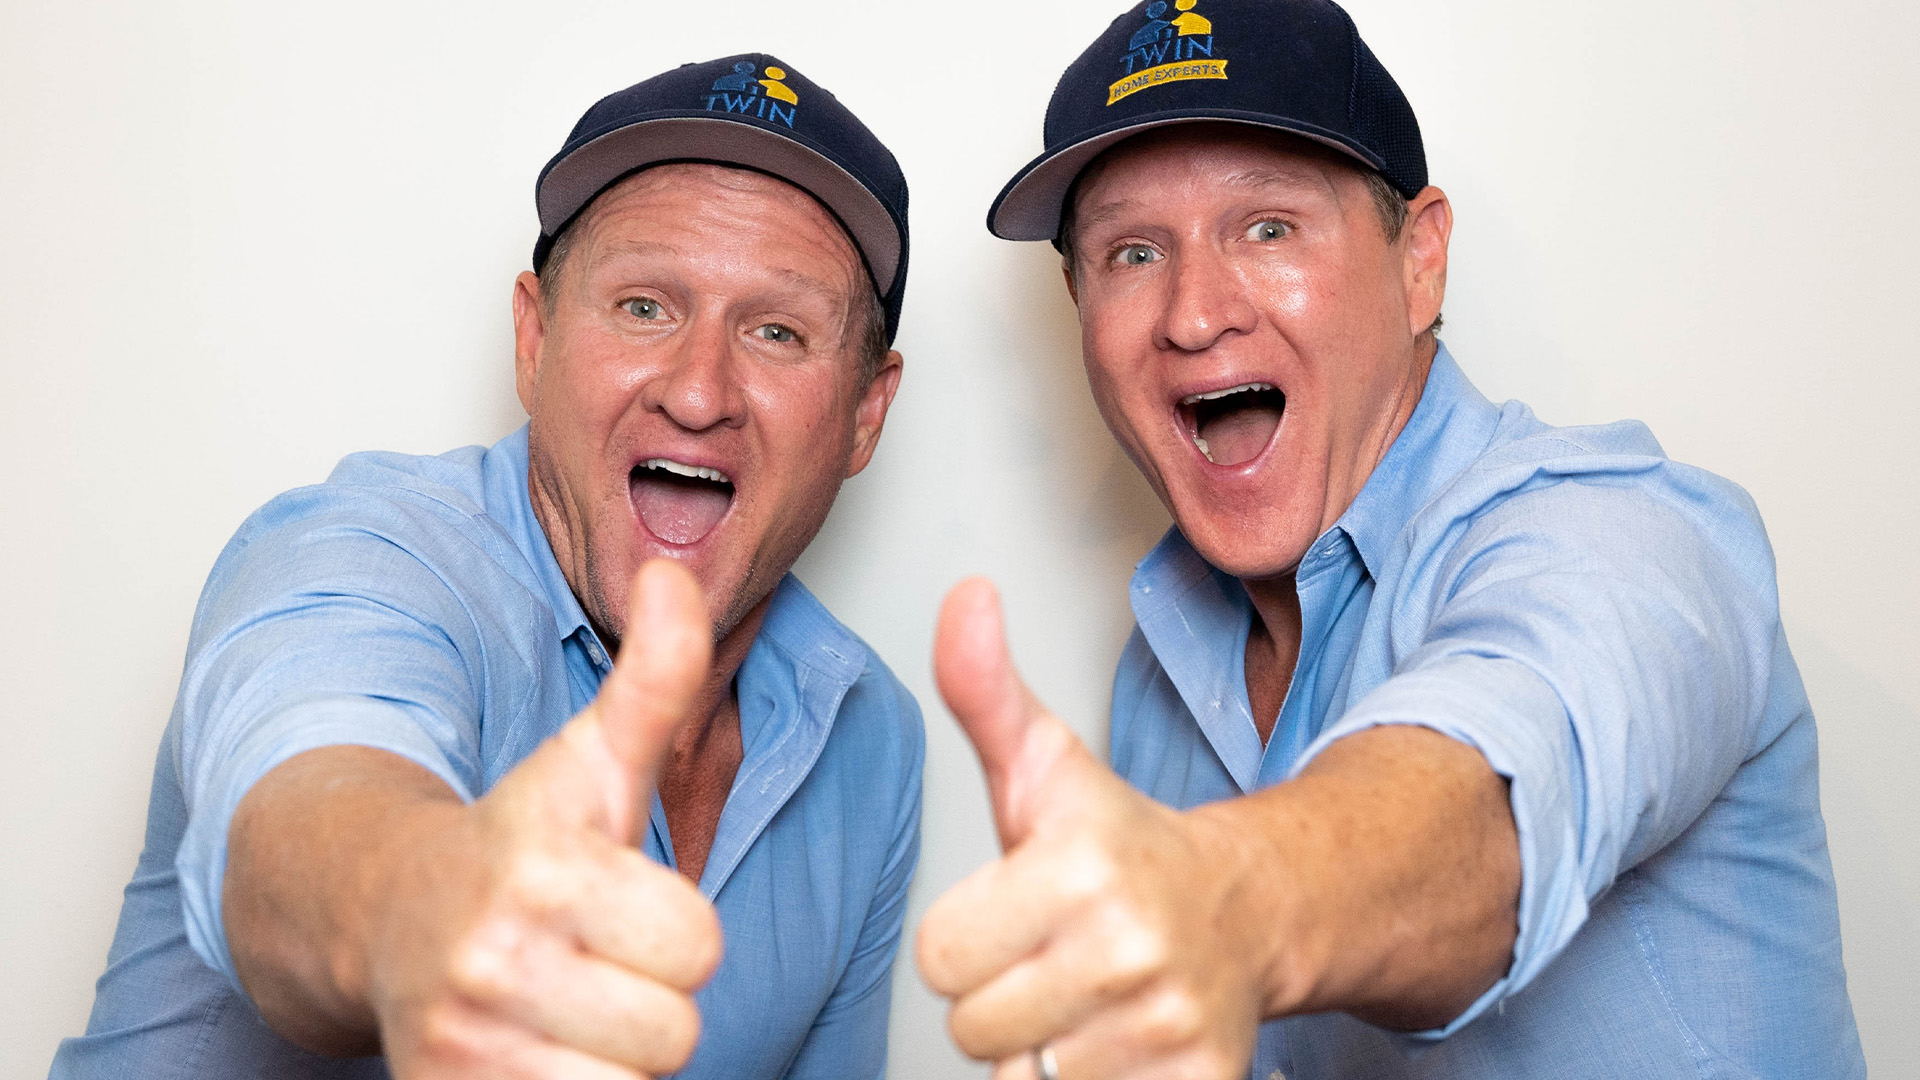 The 54-year old twins now share their home improvement tips to 780,000 followers